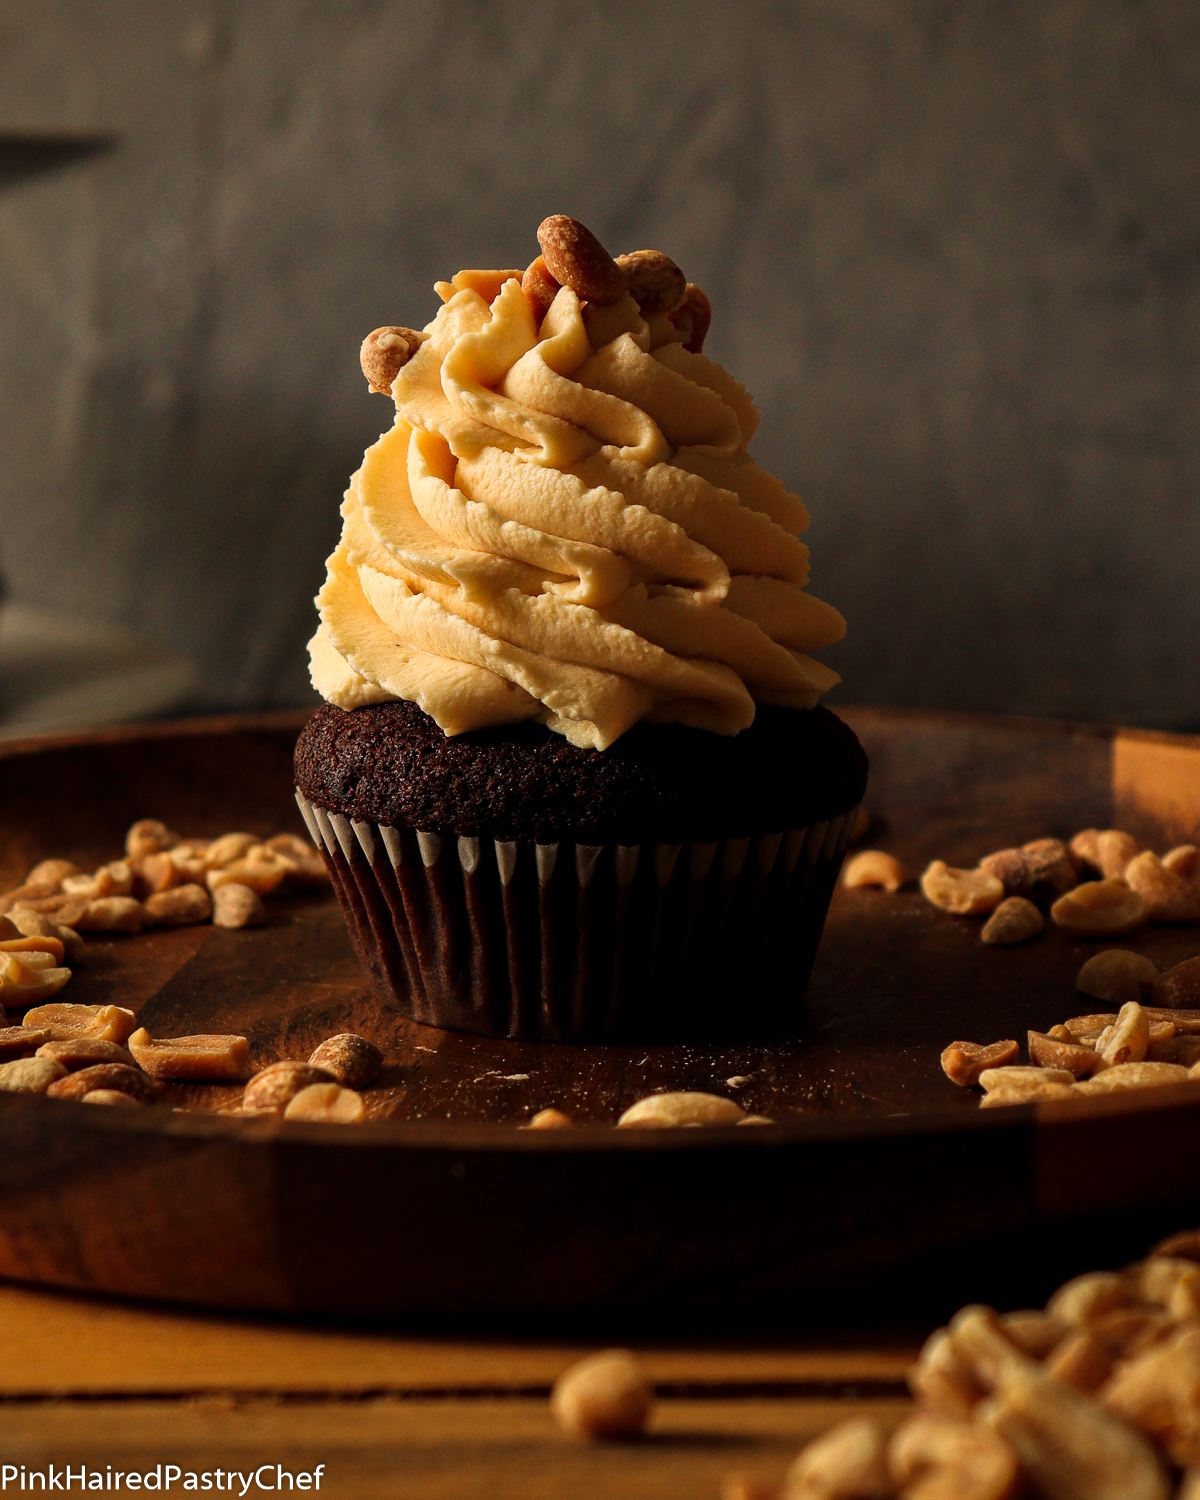 Chocolate Cupcake on top of a wooden plate, topped with Peanut Butter White Chocolate Whipped Ganache piped high on top with star nozzle. Topped with roasted peanut.